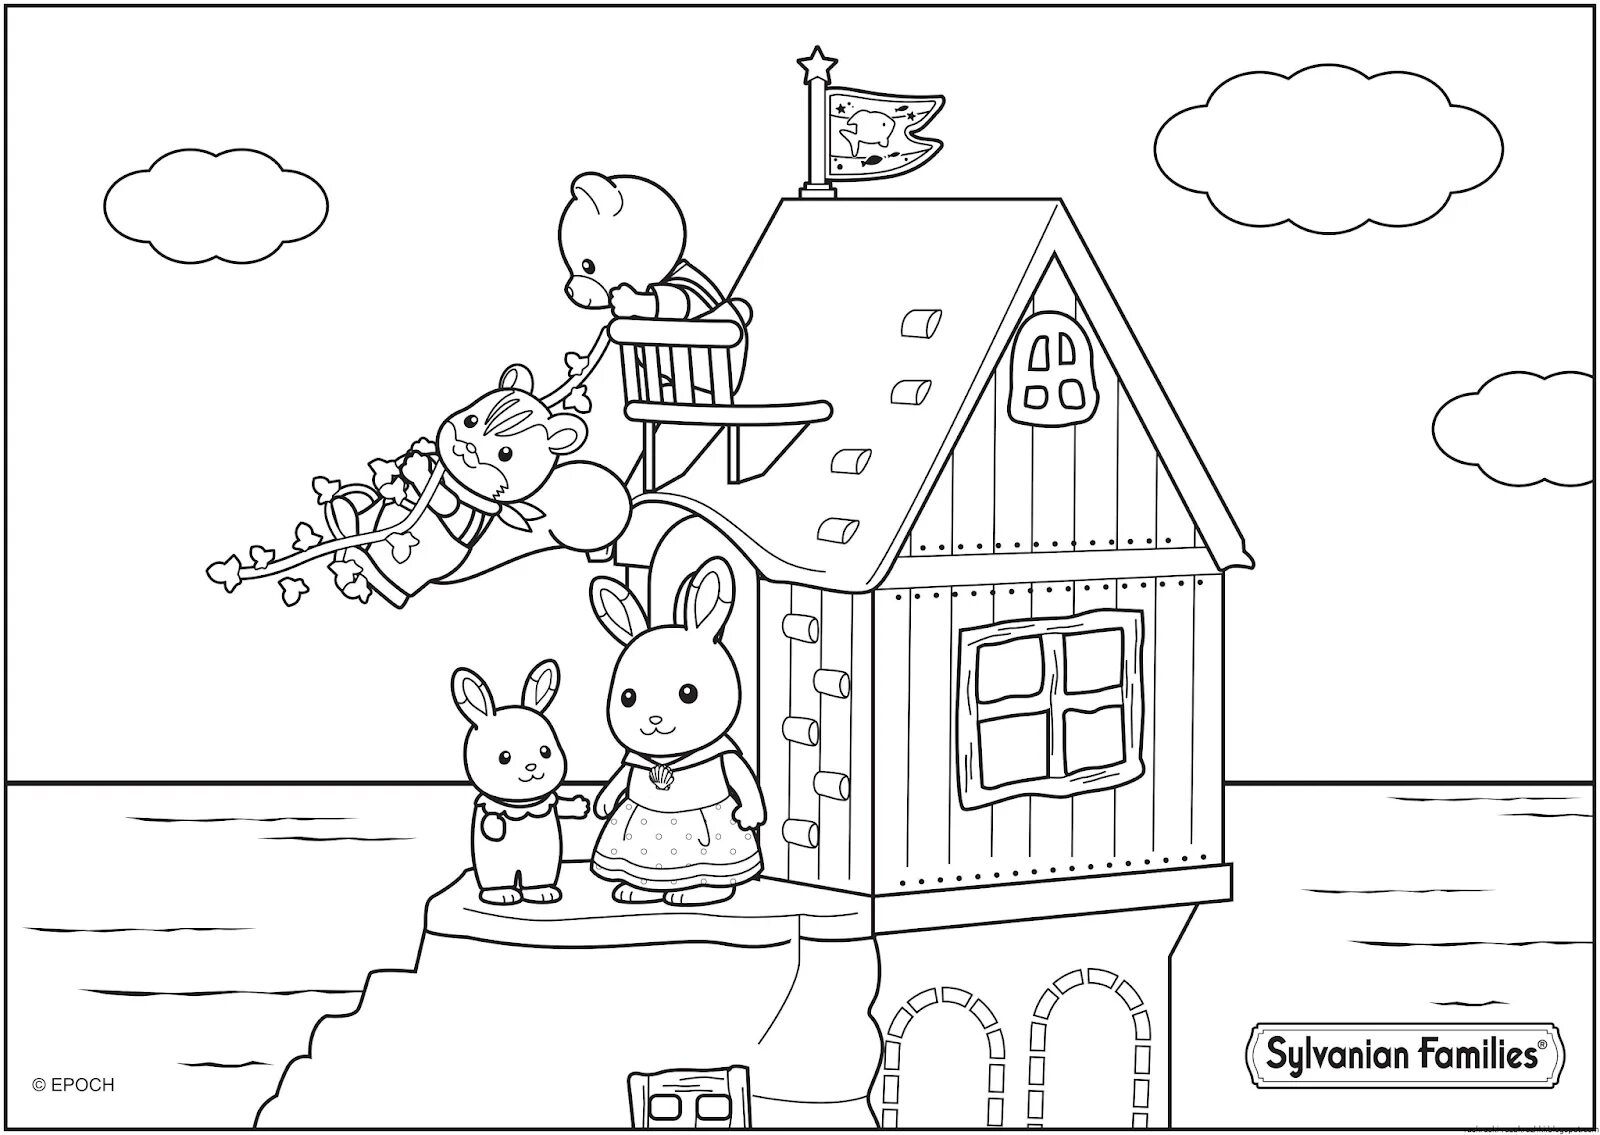 Coloring book shining house in junland